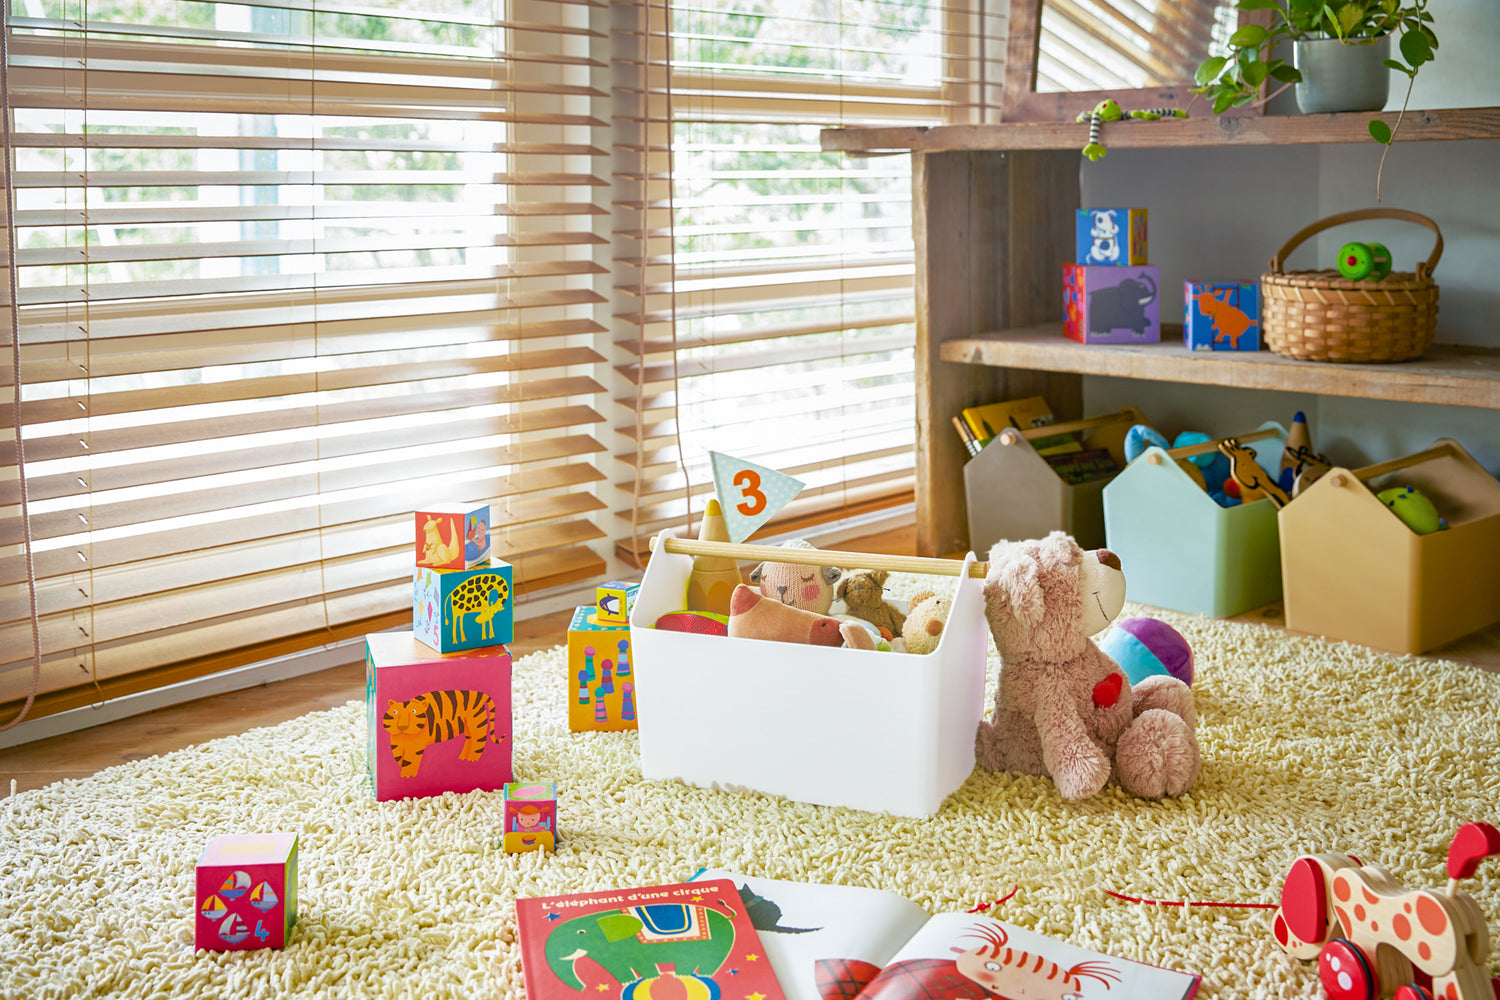 View 7 - White Storage Caddy holding children toys in playroom by Yamazaki Home.